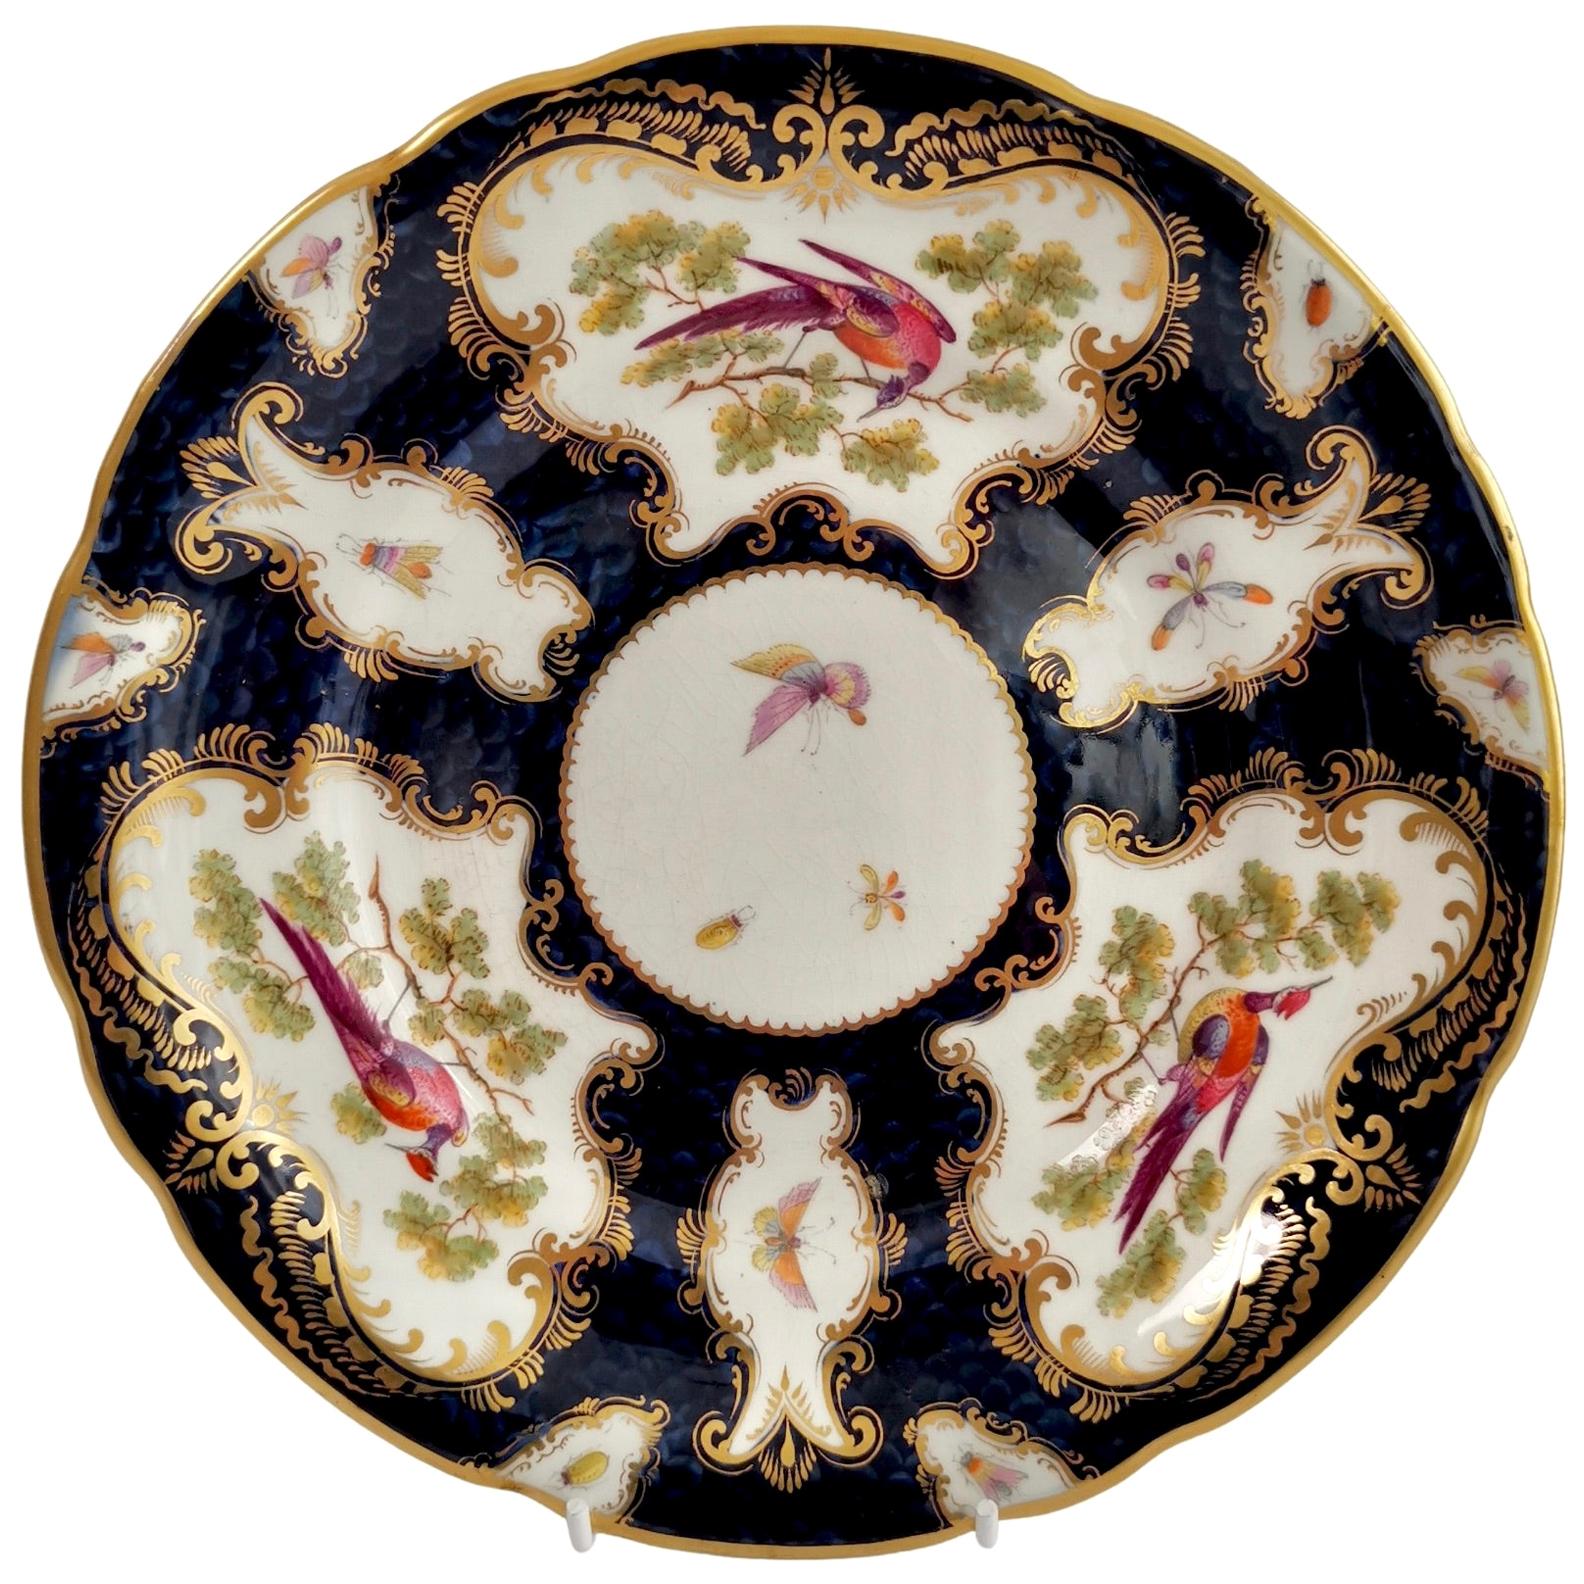 Grainger Worcester Porcelain Plate, Blue Sèvres Birds and Insects circa 1880 '2'